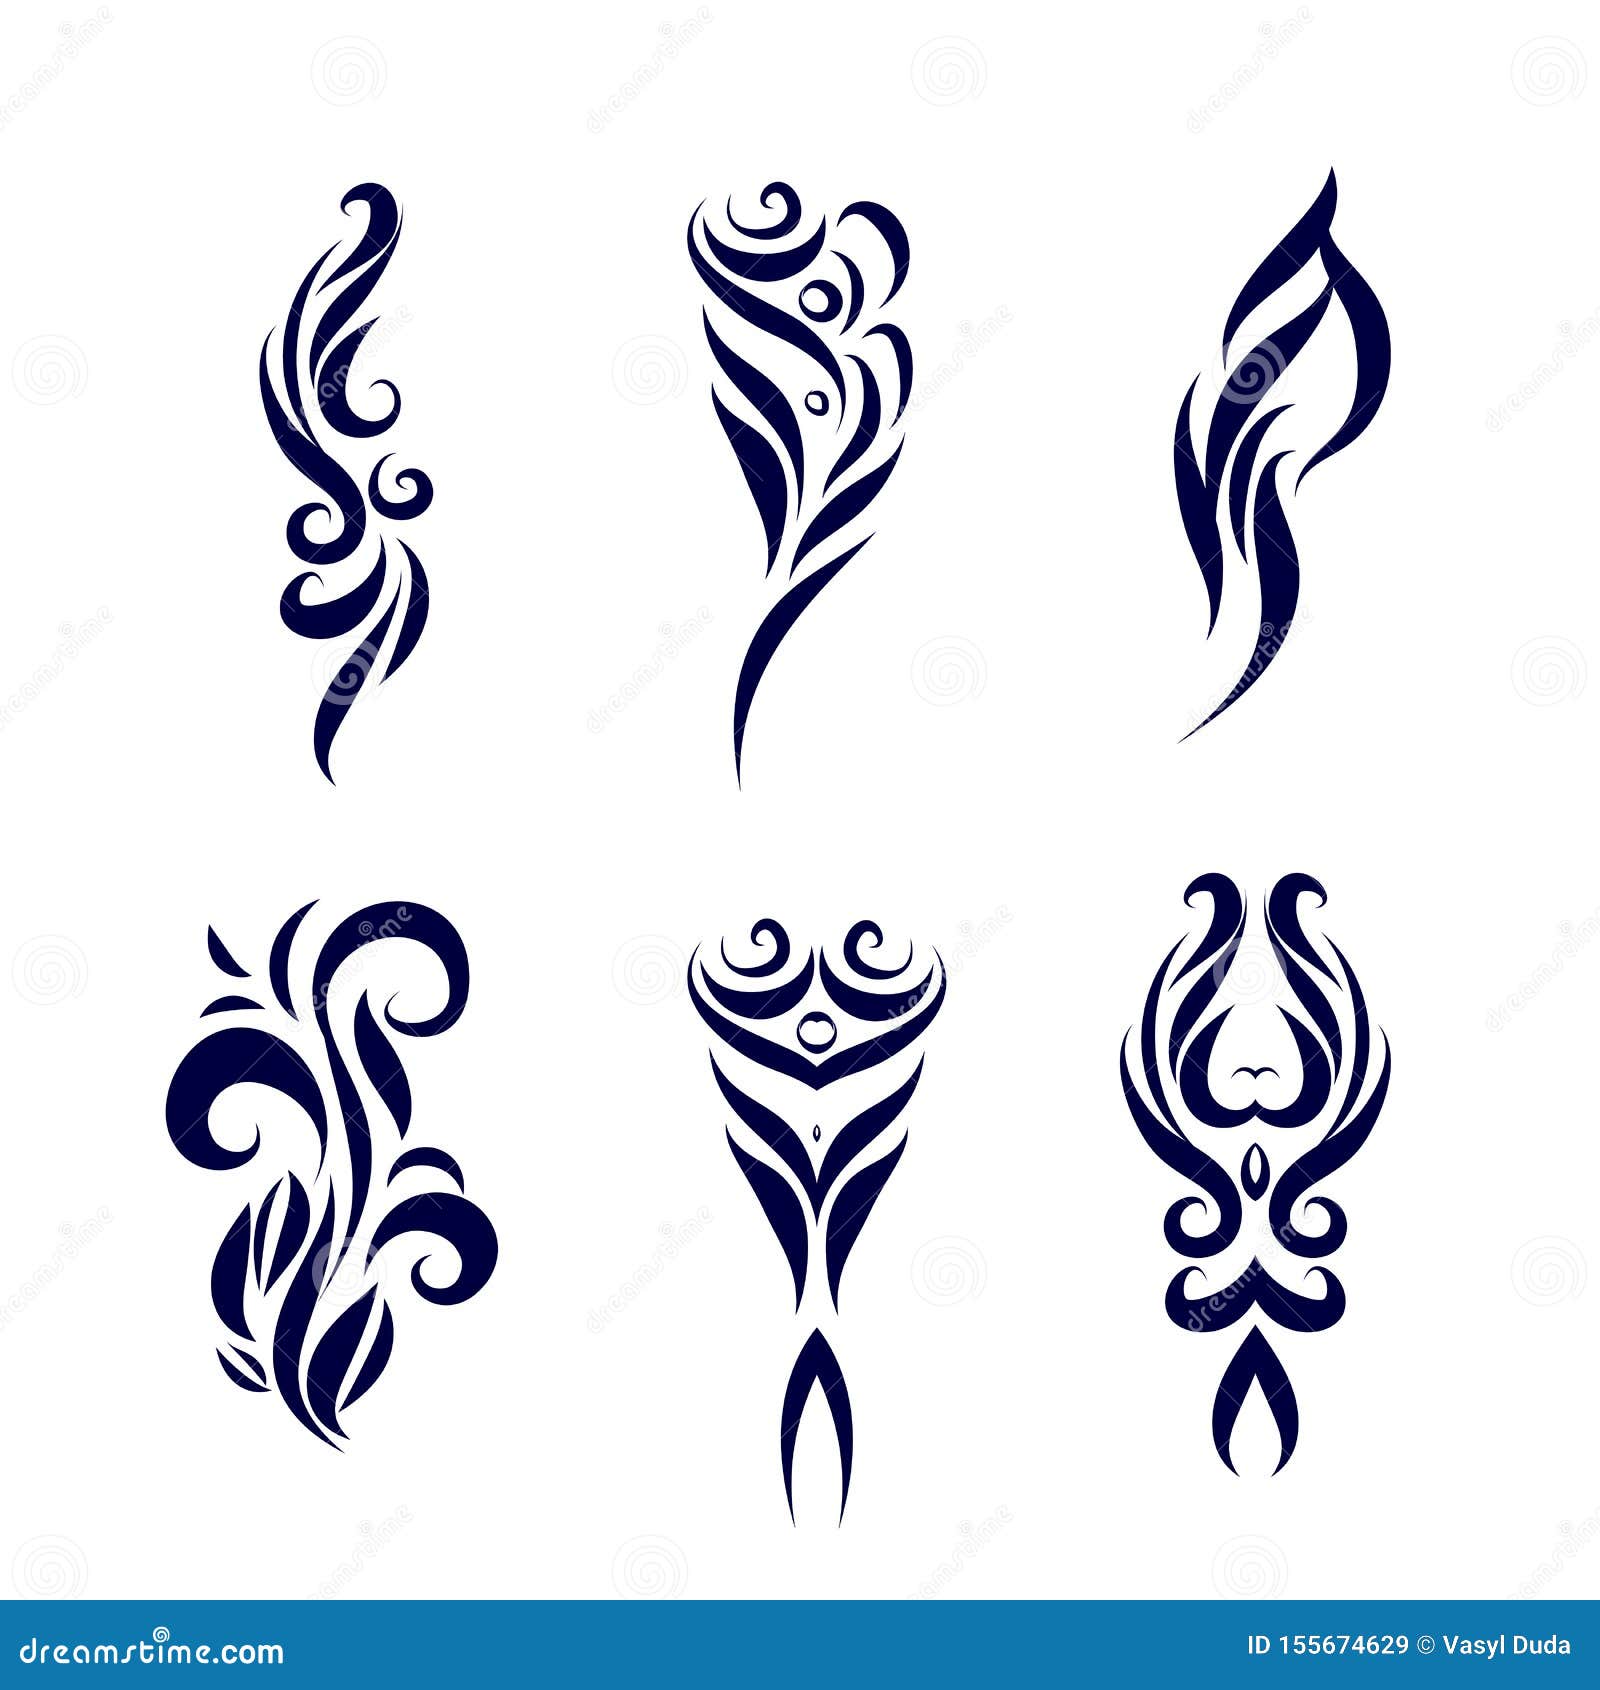 Laser Cut Tribal Tattoo Scorpion Free Vector cdr Download - 3axis.co